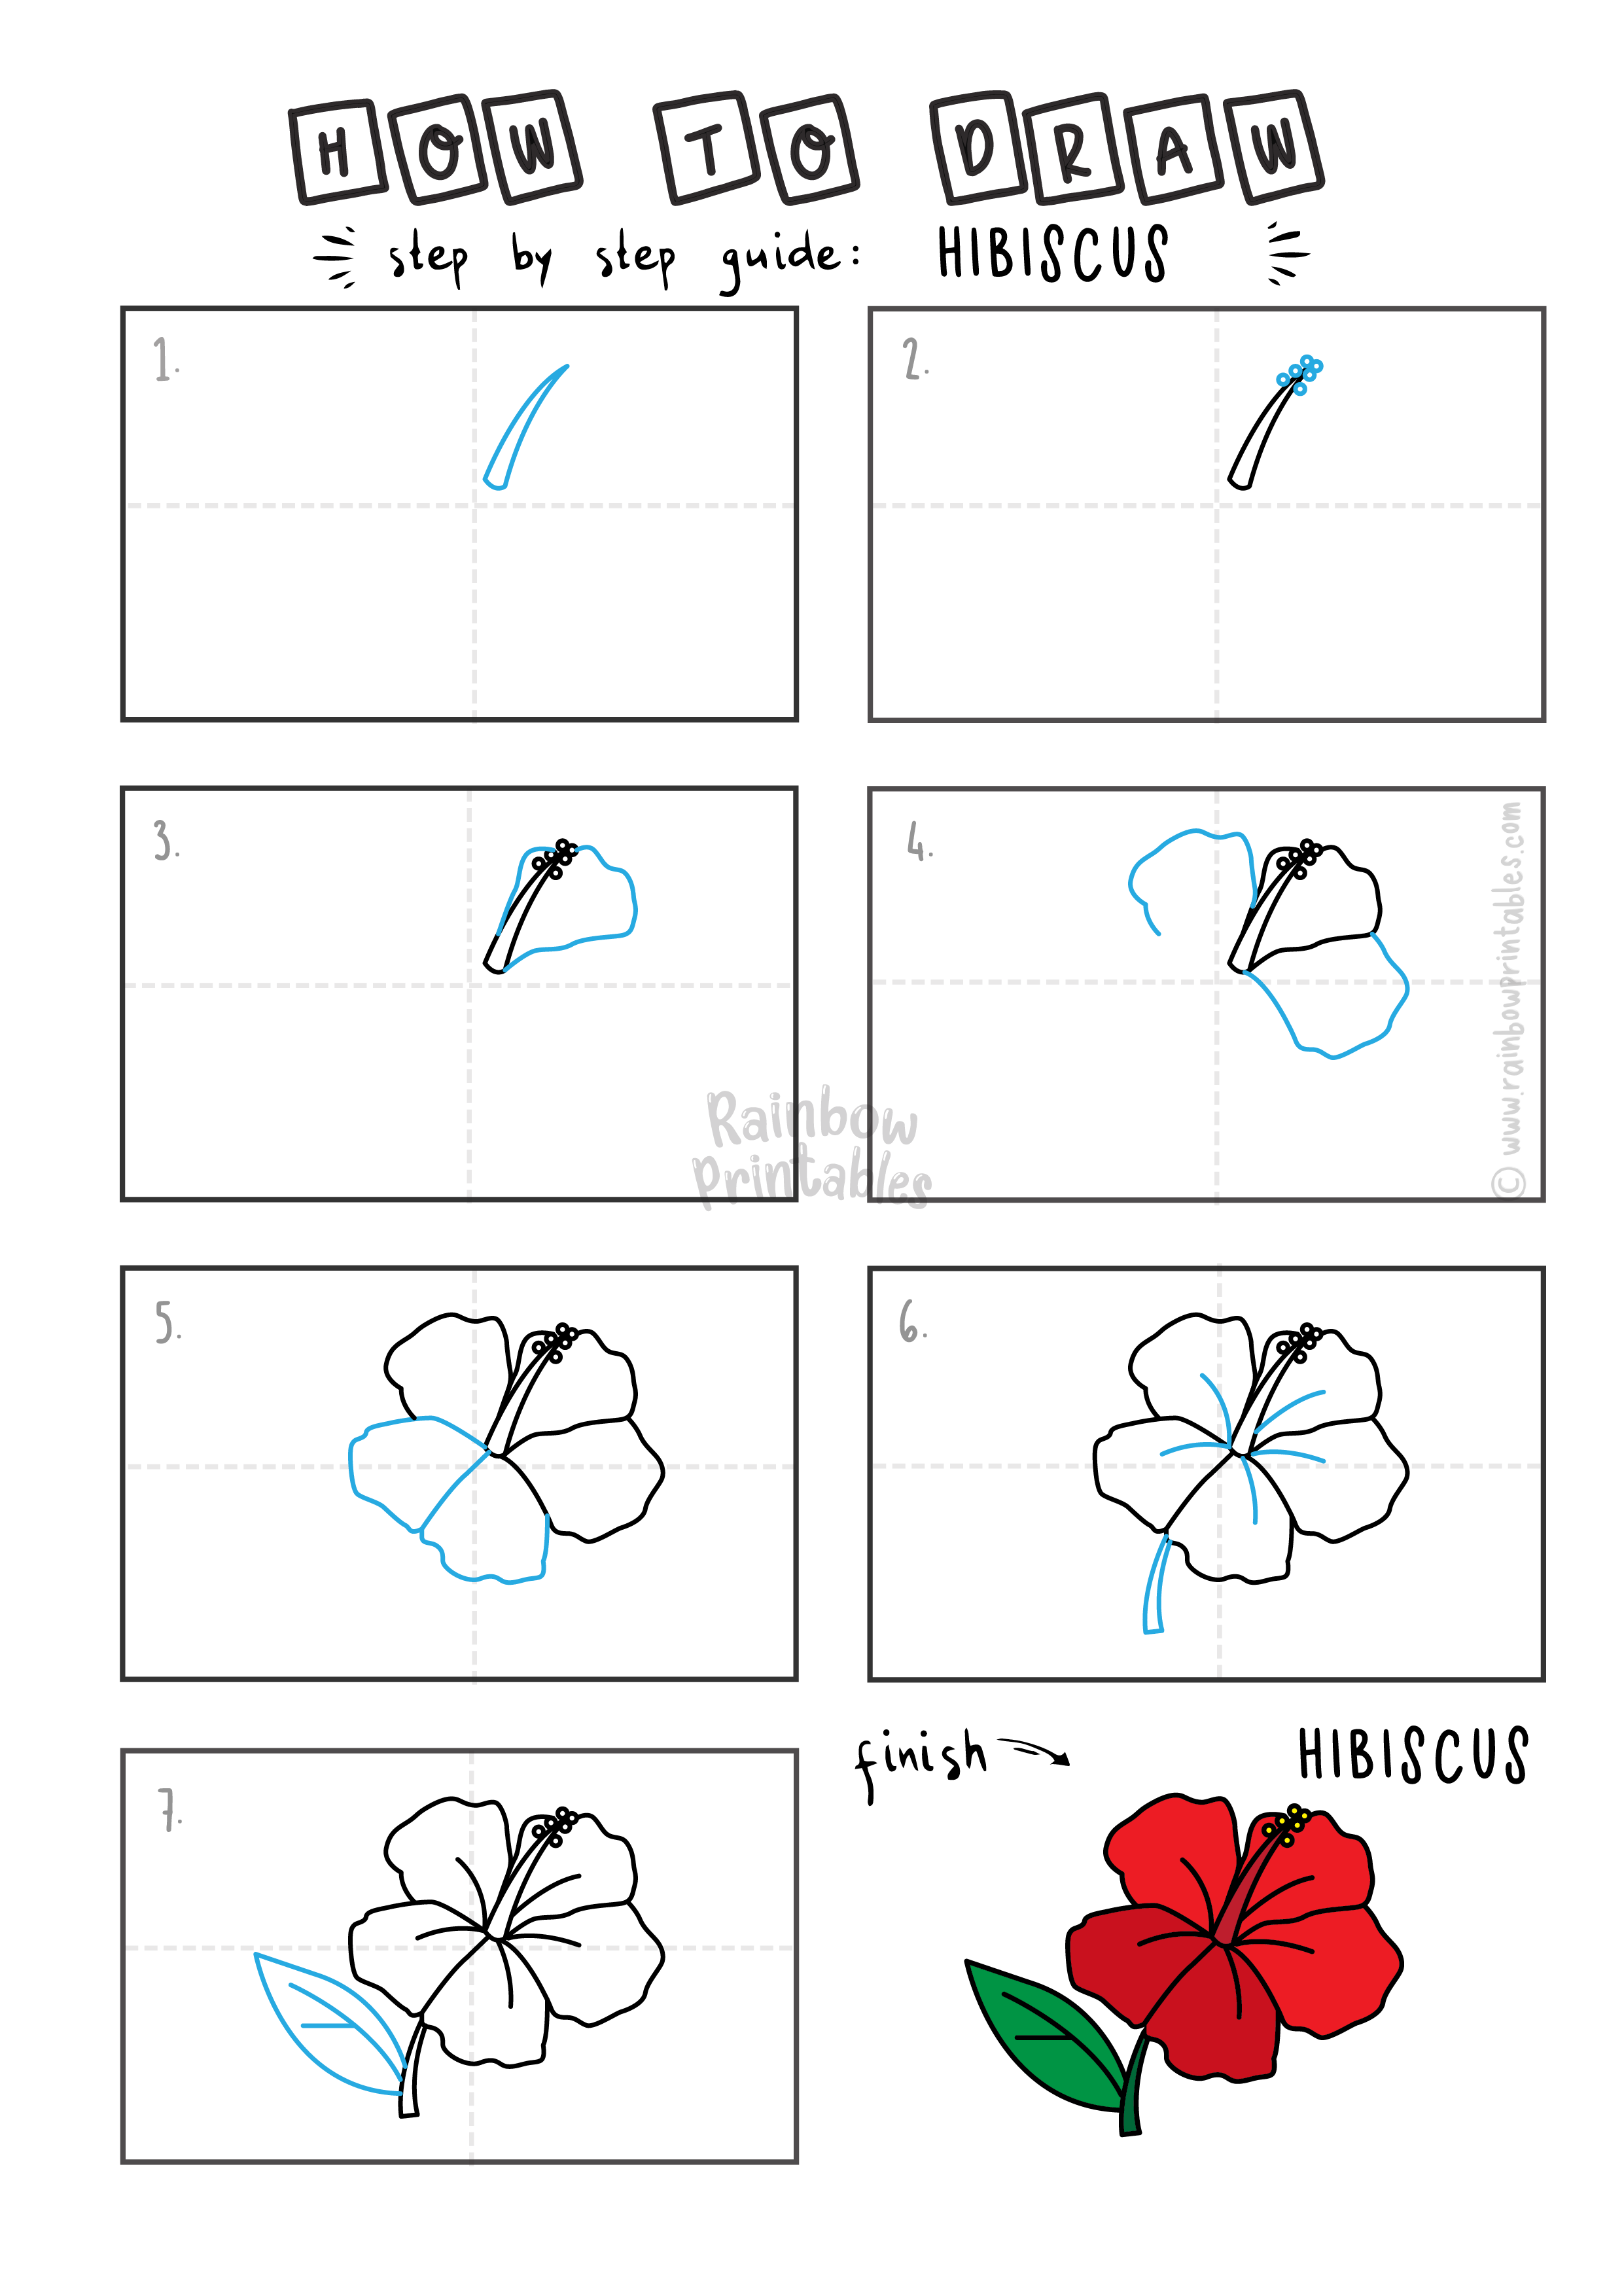 How To Draw a HIBISCUS FLOWER RED PARADISE PLANT EXOTIC Step By Step Easy Simple Drawing Guide for Kids